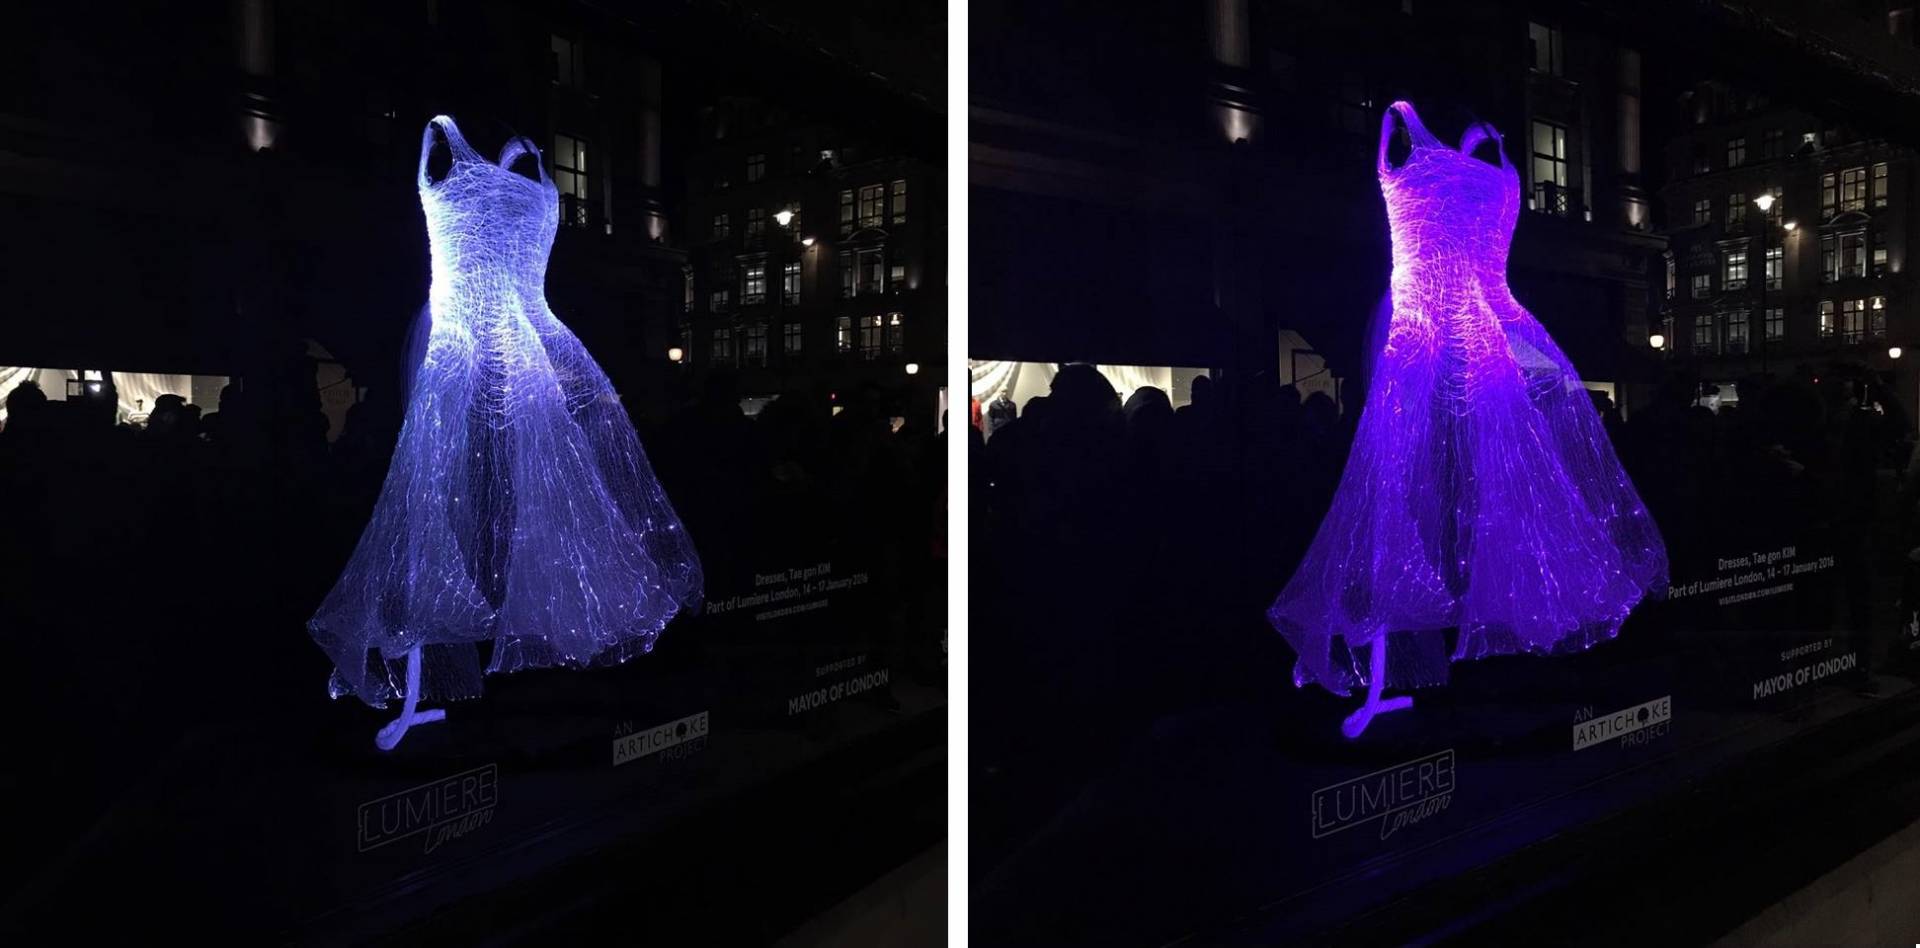 Dresses, Tae gon KIM @ Great Malbourough Street, for Lumiere London